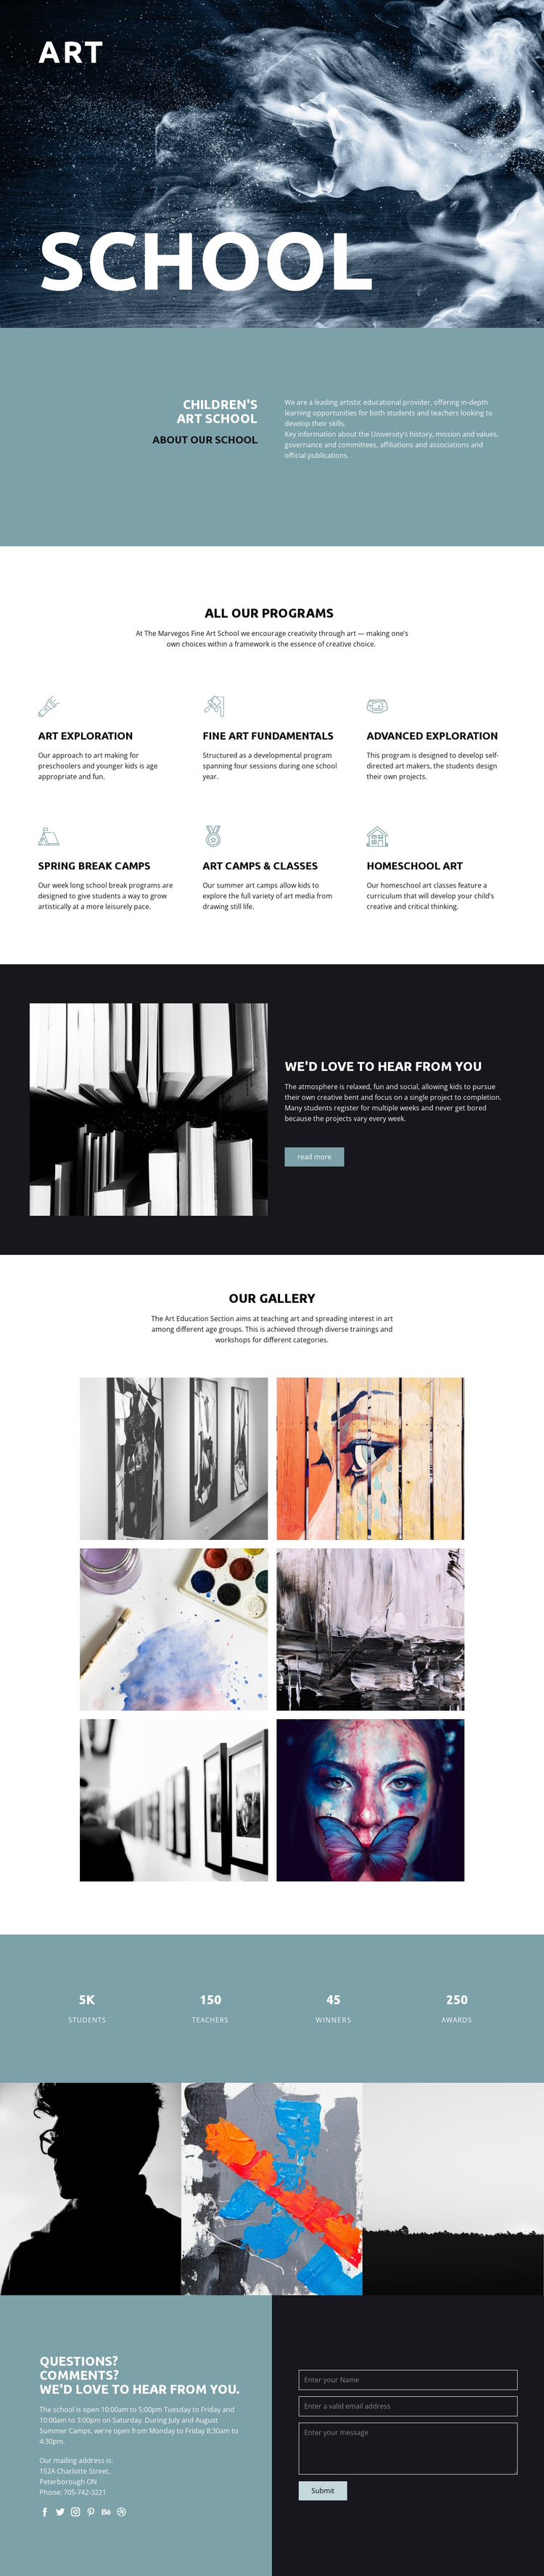 School of artistic education HTML5 Template